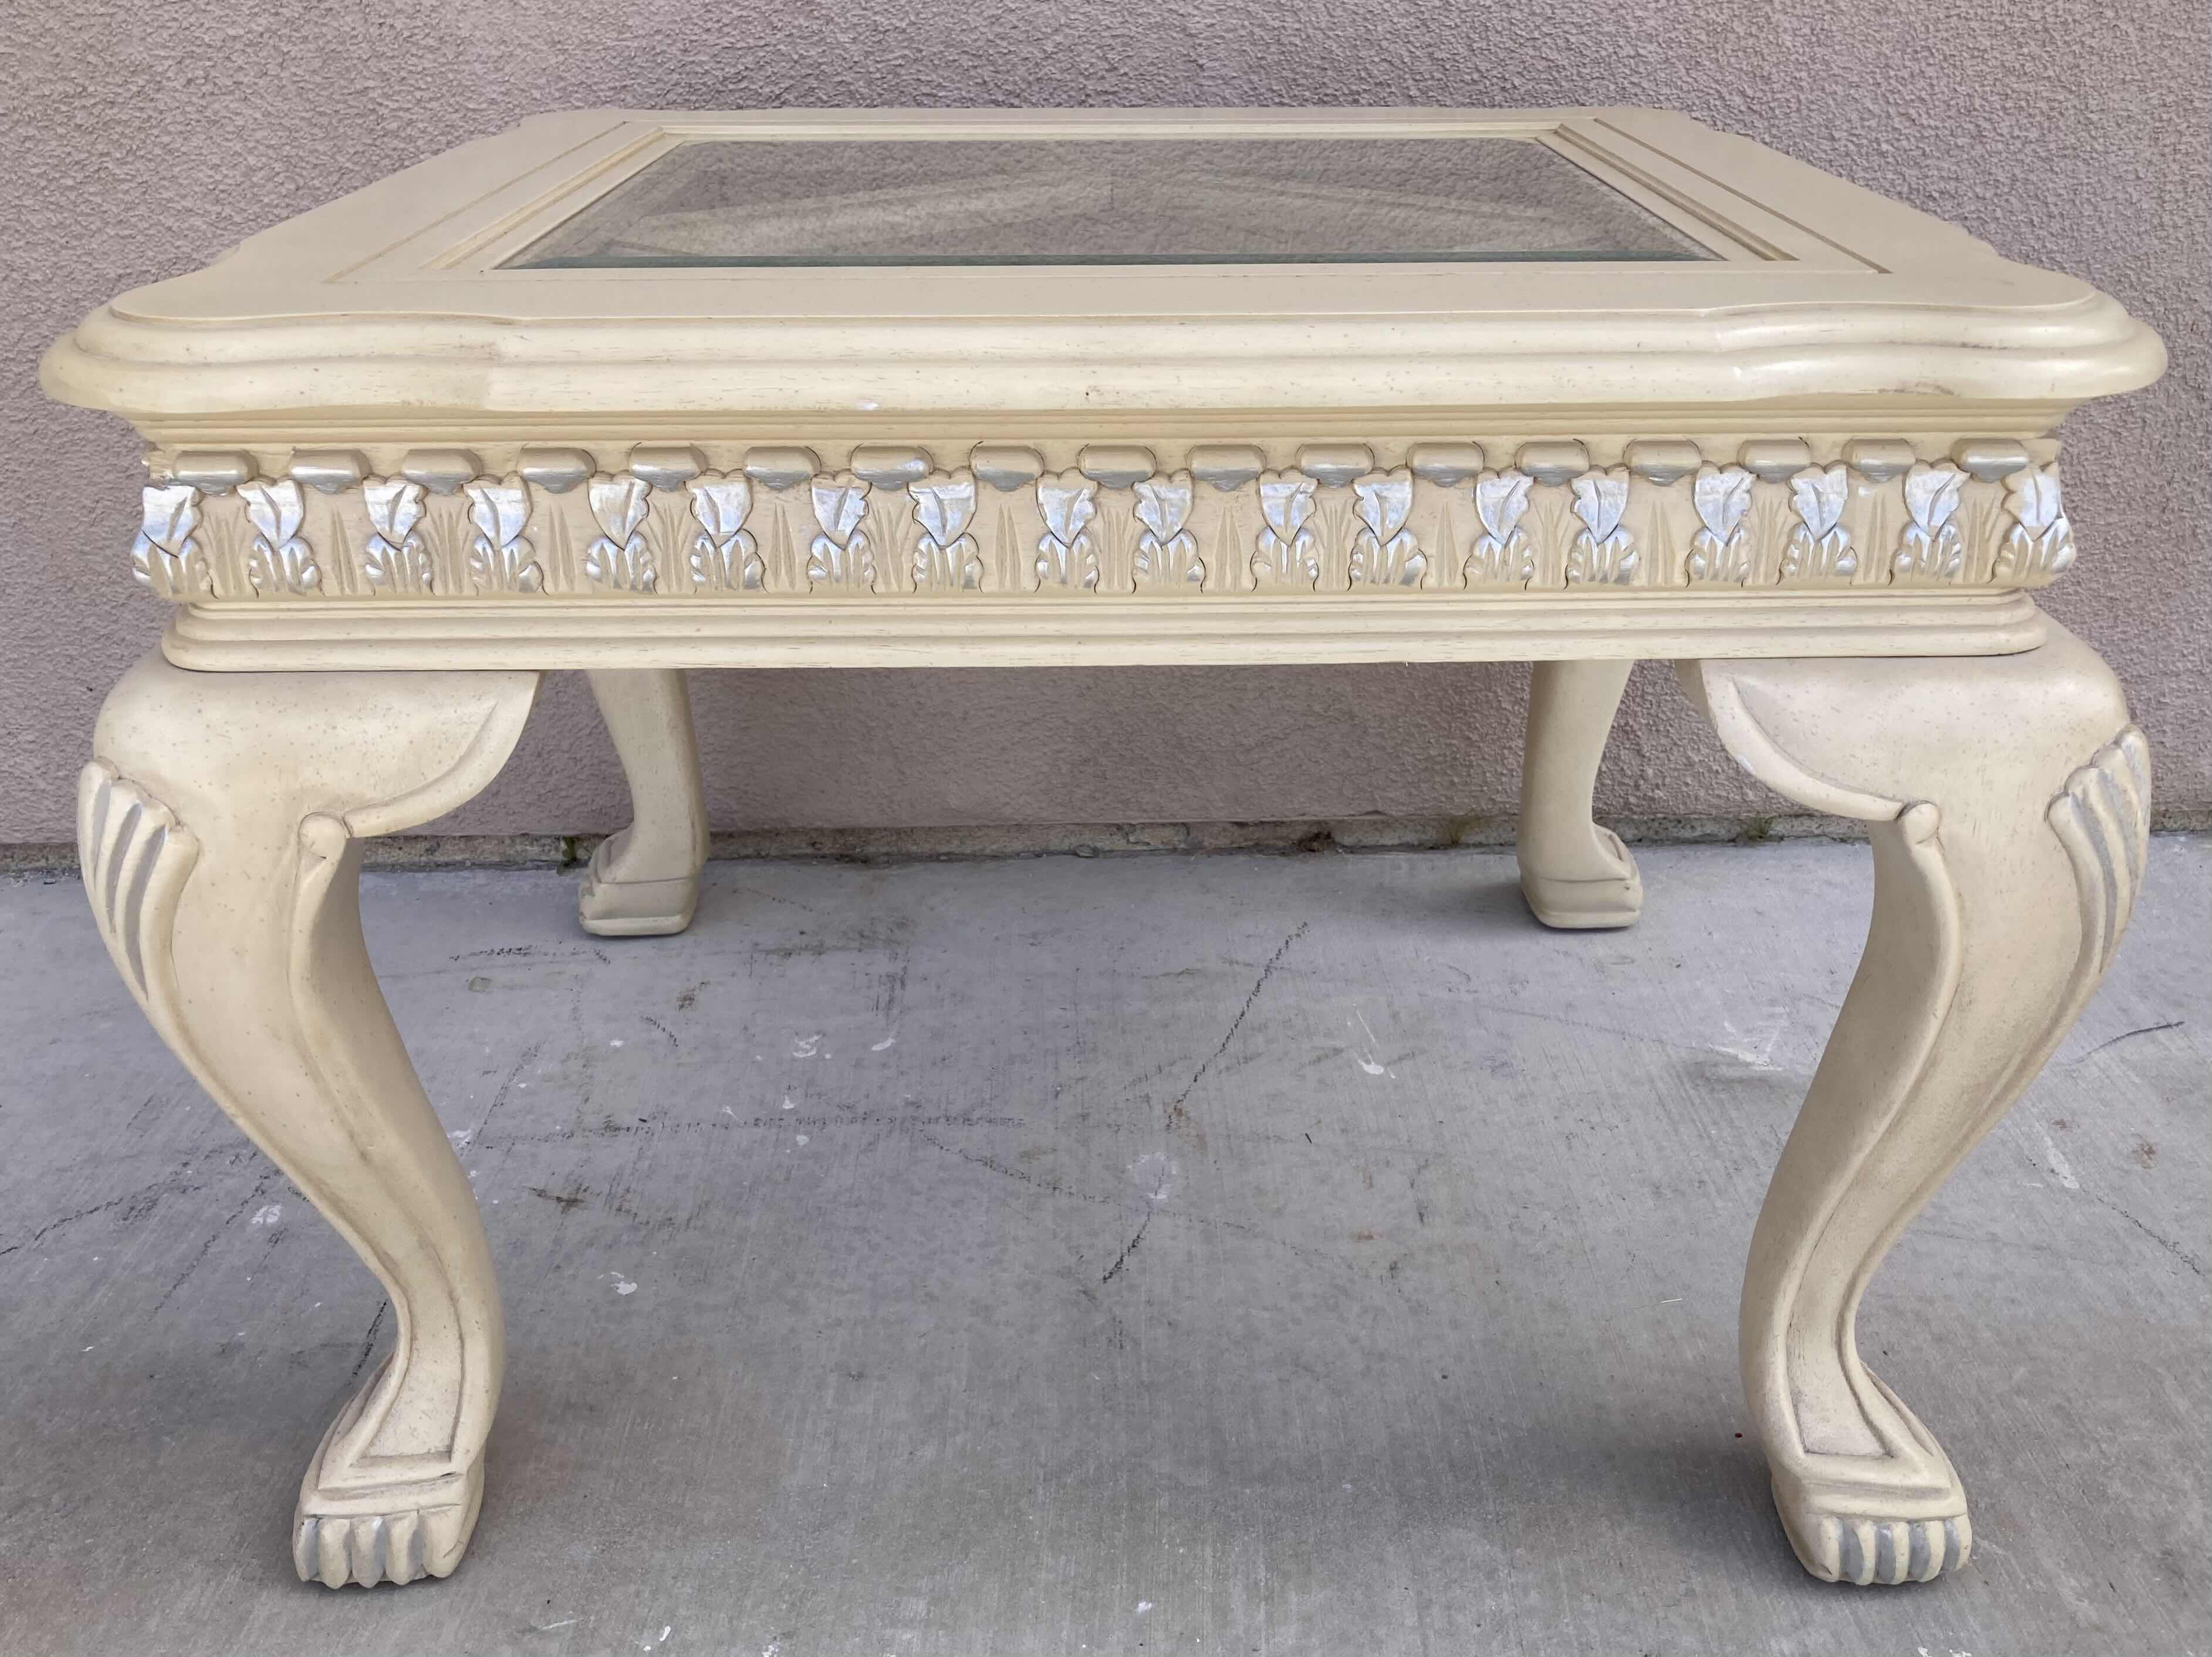 Photo 2 of MID-CENTURY STYLE CREAM W SILVER ACCENTED WOOD FINISH GLASS TOP INLAY END TABLE 25.5” X 28.5” H21.5”